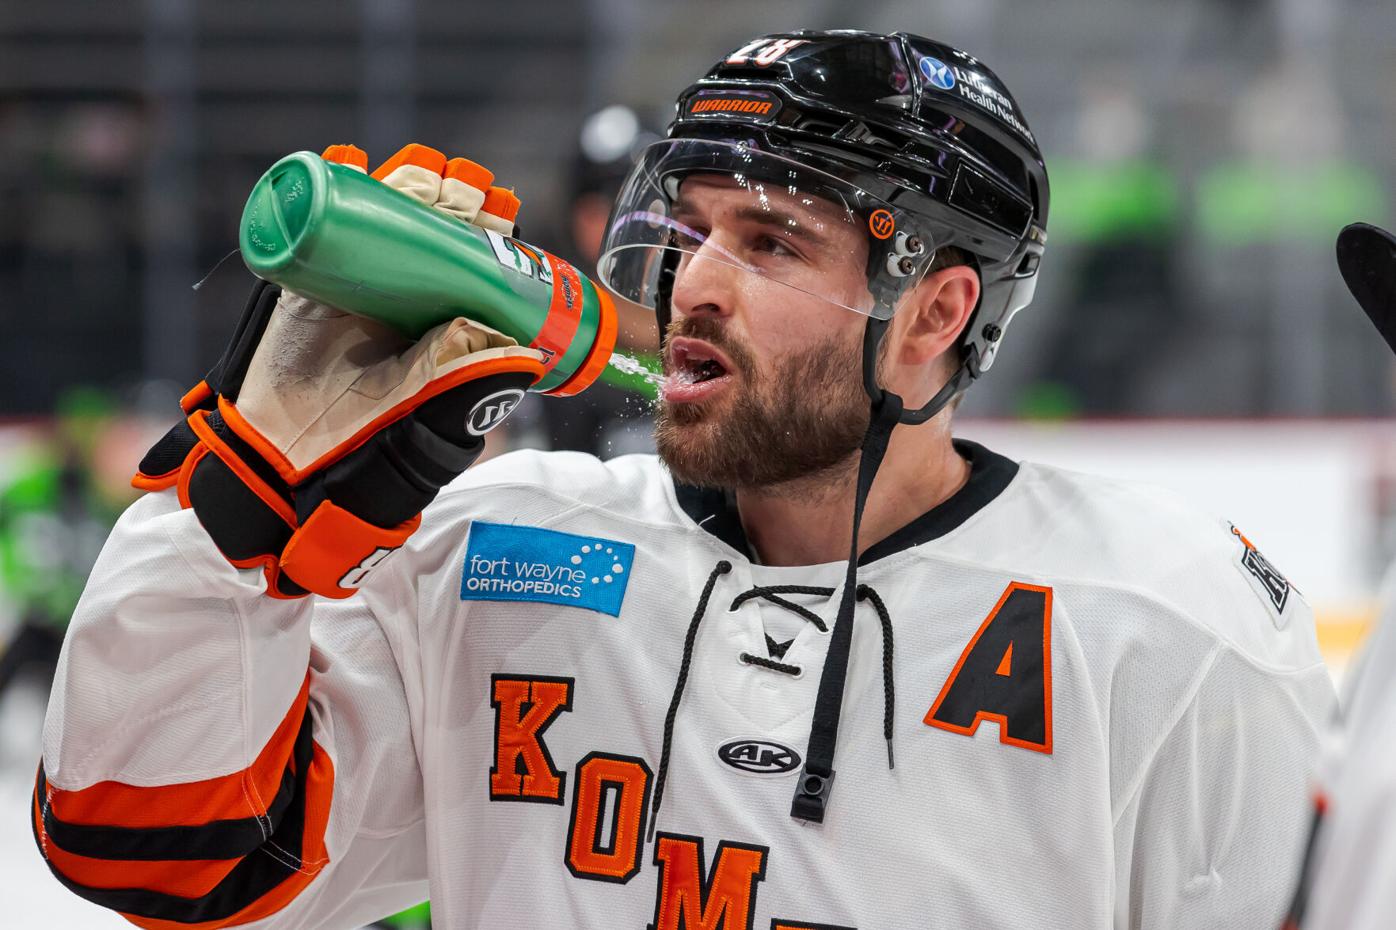 Zoinks! Much-improved Komets lose to meddling Ghost Pirates in overtime  shootout, Komets